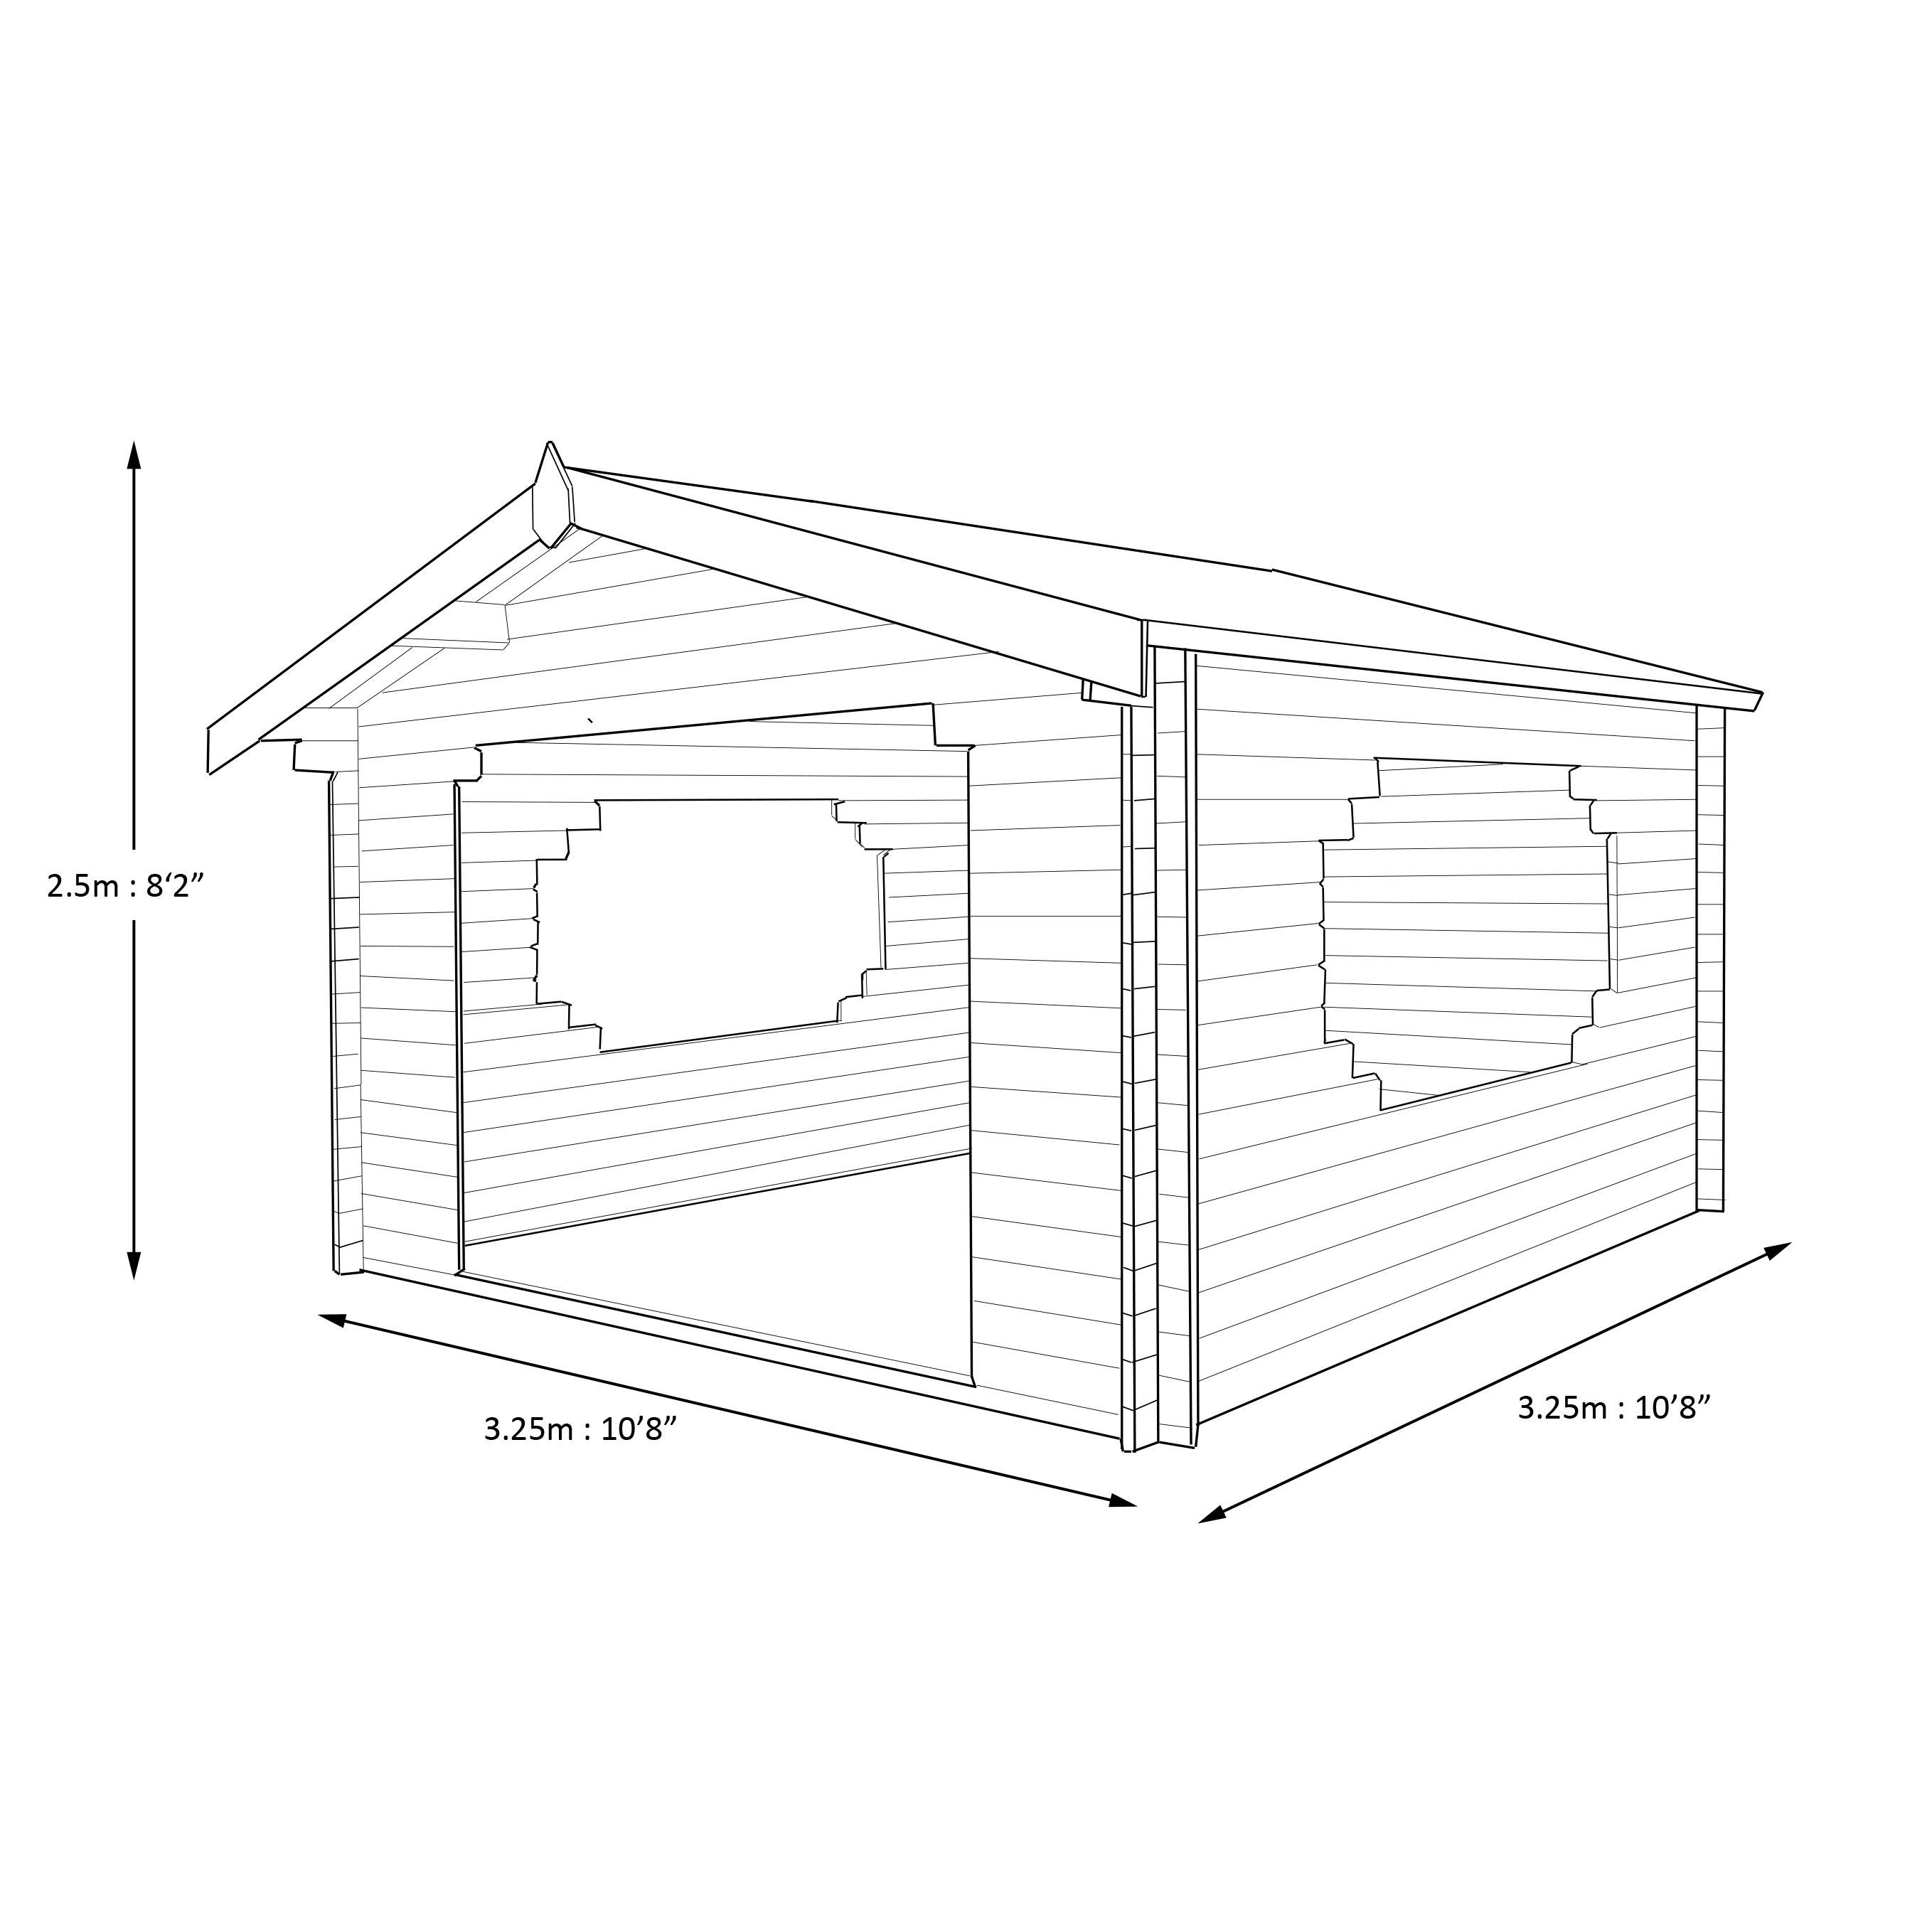 Shire Bere 11x11 ft Apex Tongue & groove Wooden Cabin with Felt tile roof